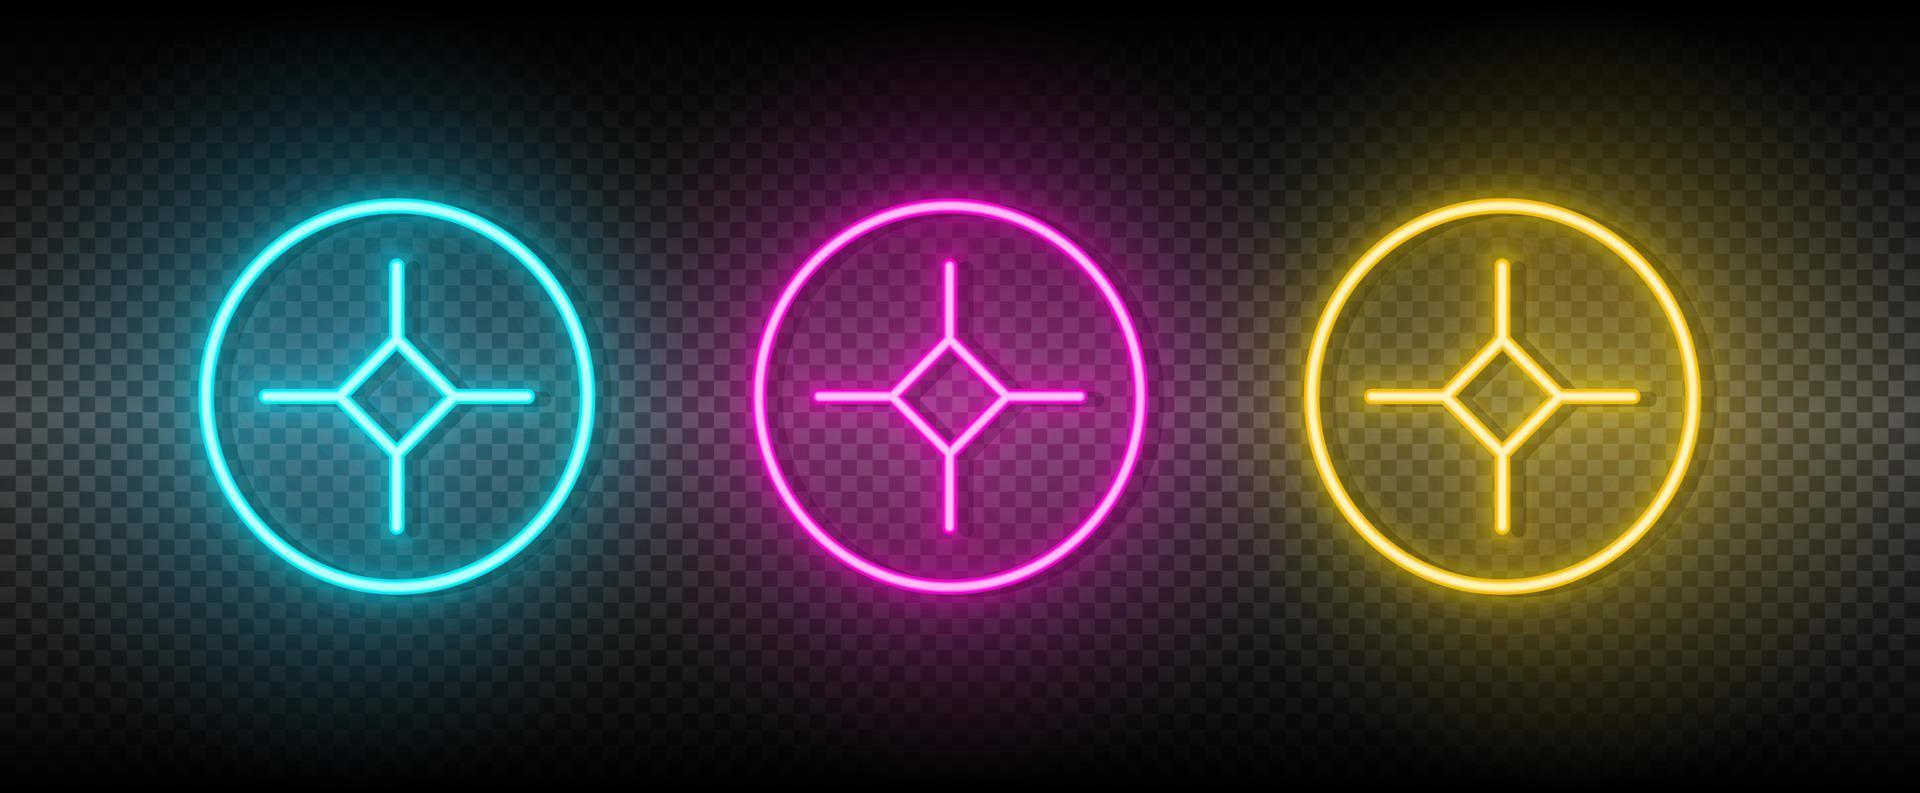 cross, screw, screwdriver vector icon yellow, pink, blue neon set. Tools vector icon on dark transparency background